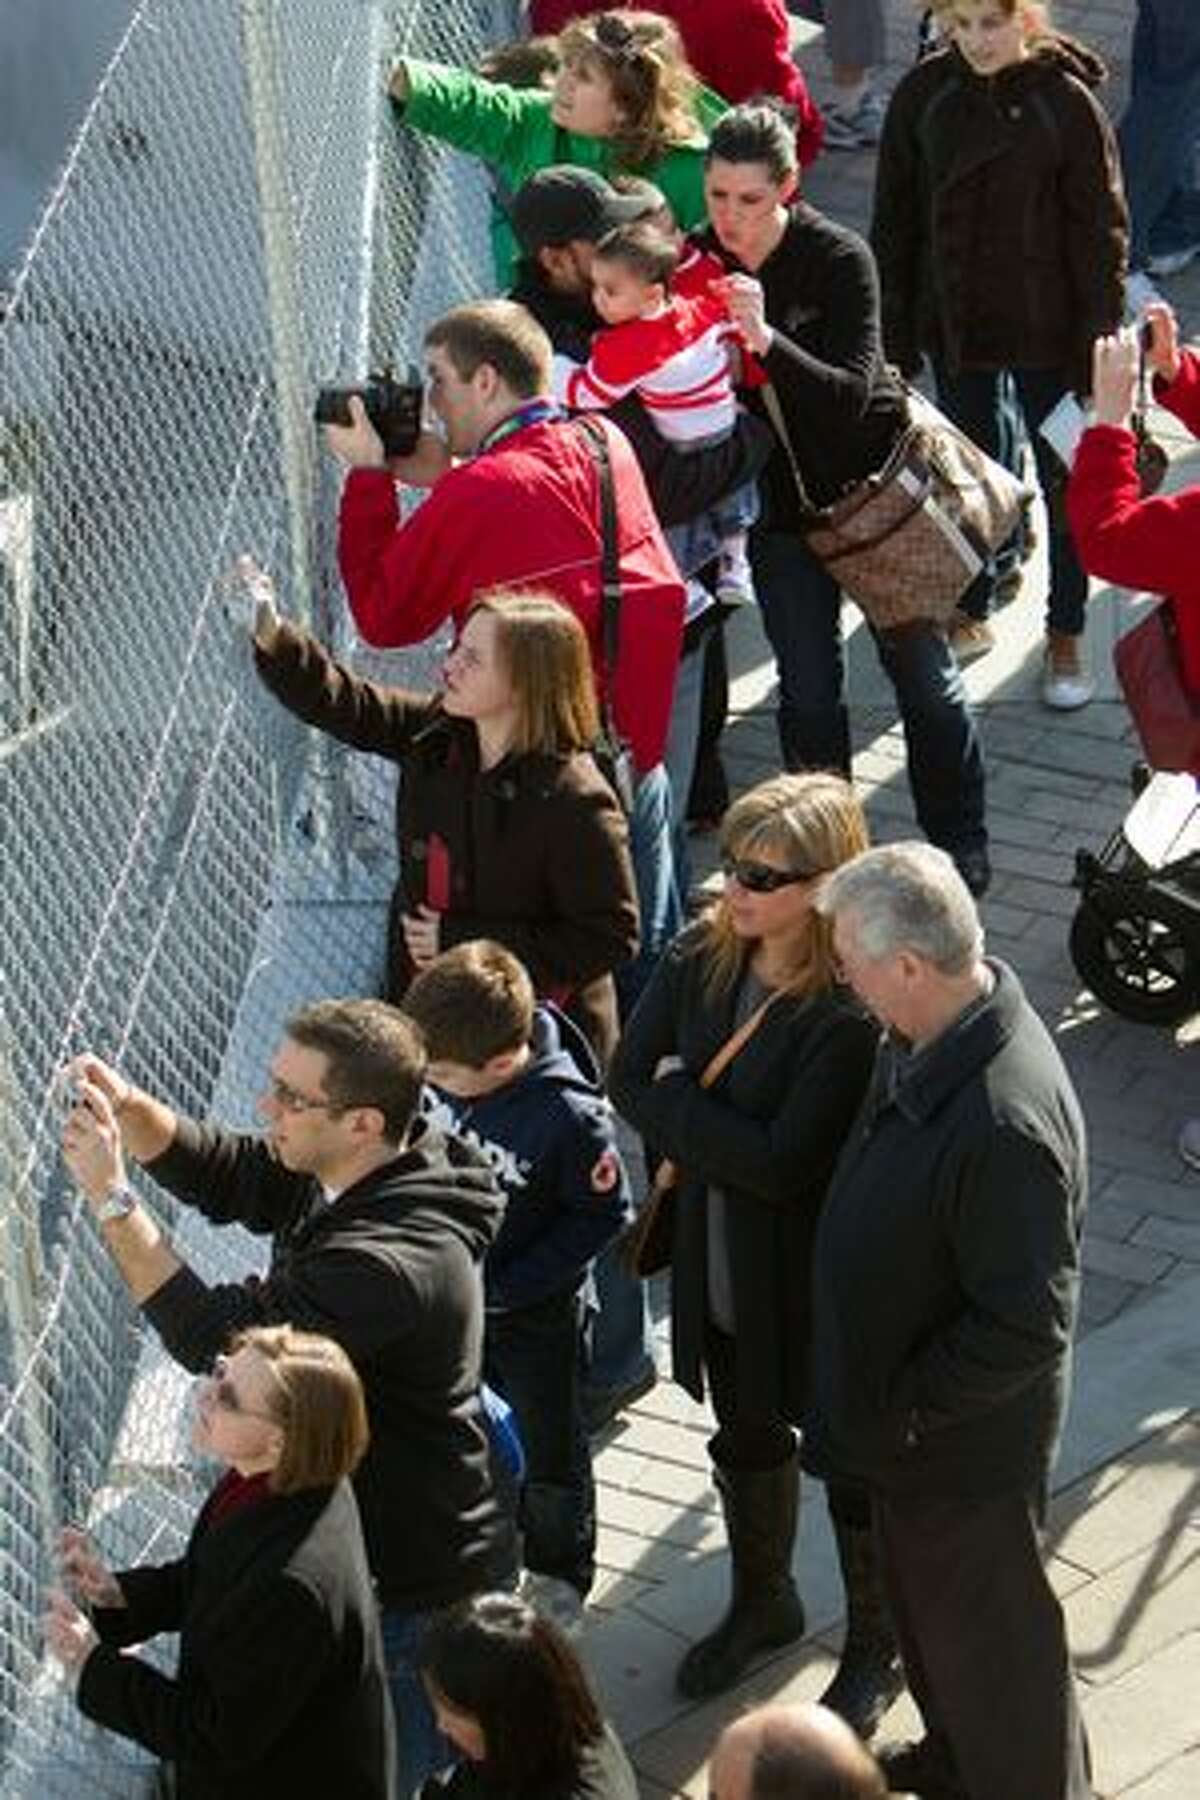 Crowds press against a fence to see the Olympic cauldron in downtown Vancouver at the 2010 Winter Olympics on Wednesday, Feb. 17, 2010. Complaints about the inability to see the cauldron because of fencing prompted officials to open a viewing area and remove banners from the fences. The line for the viewing area was 45 minutes long. ( Smiley N. Pool / Houston Chronicle )